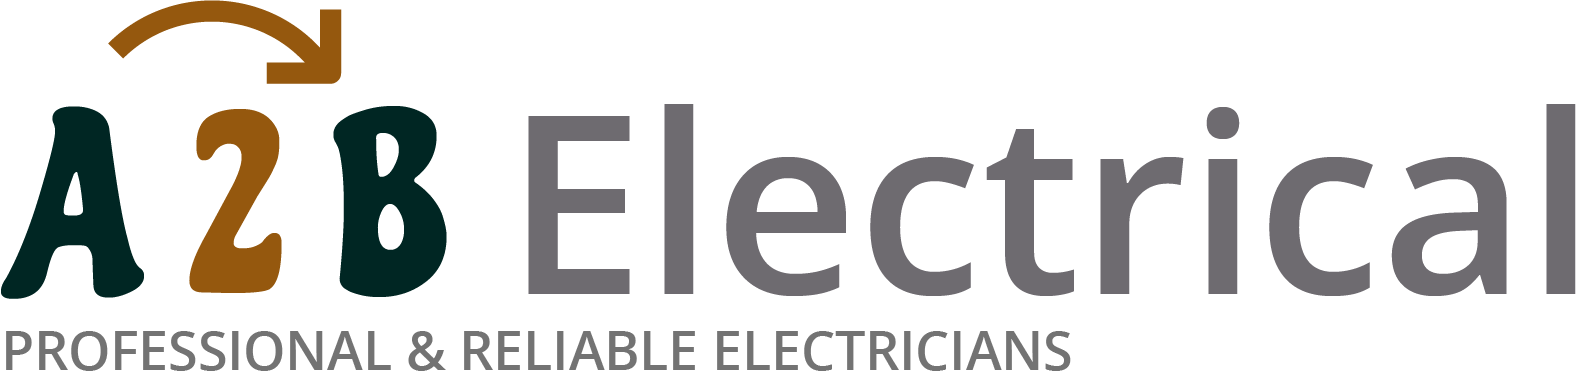 If you have electrical wiring problems in Leighton Buzzard, we can provide an electrician to have a look for you. 